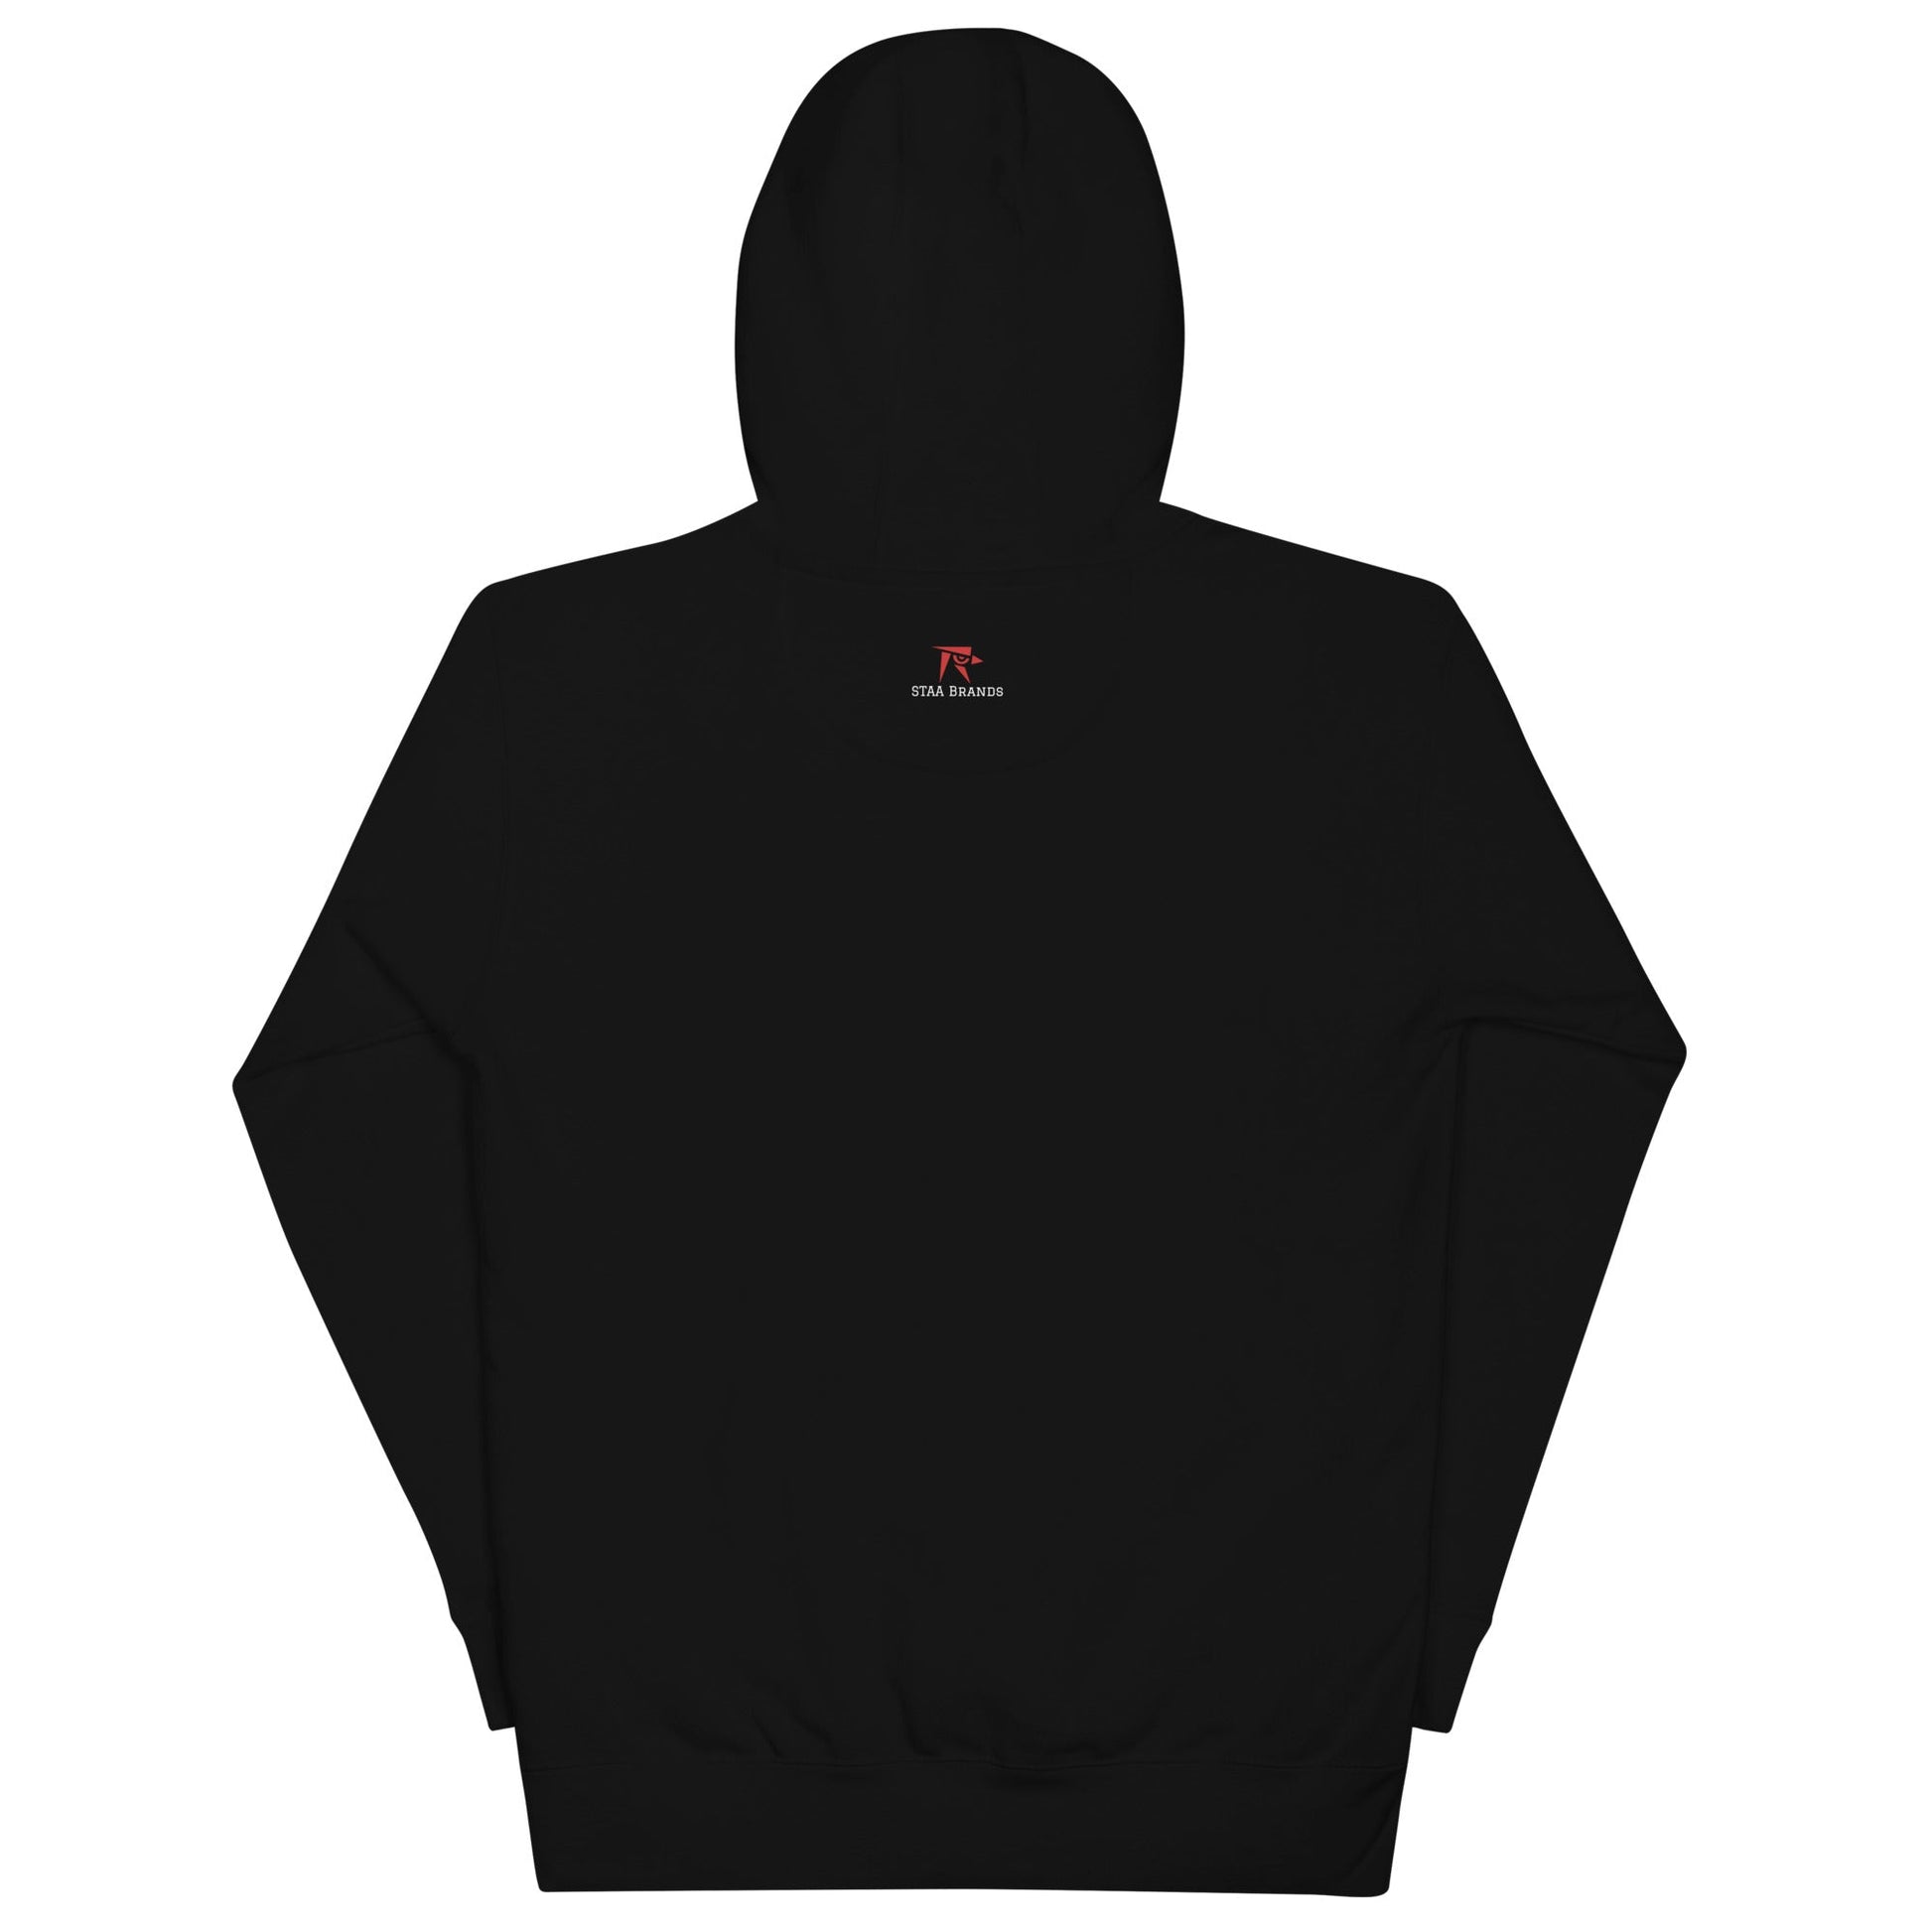 a black hoodie with a red and white logo on it